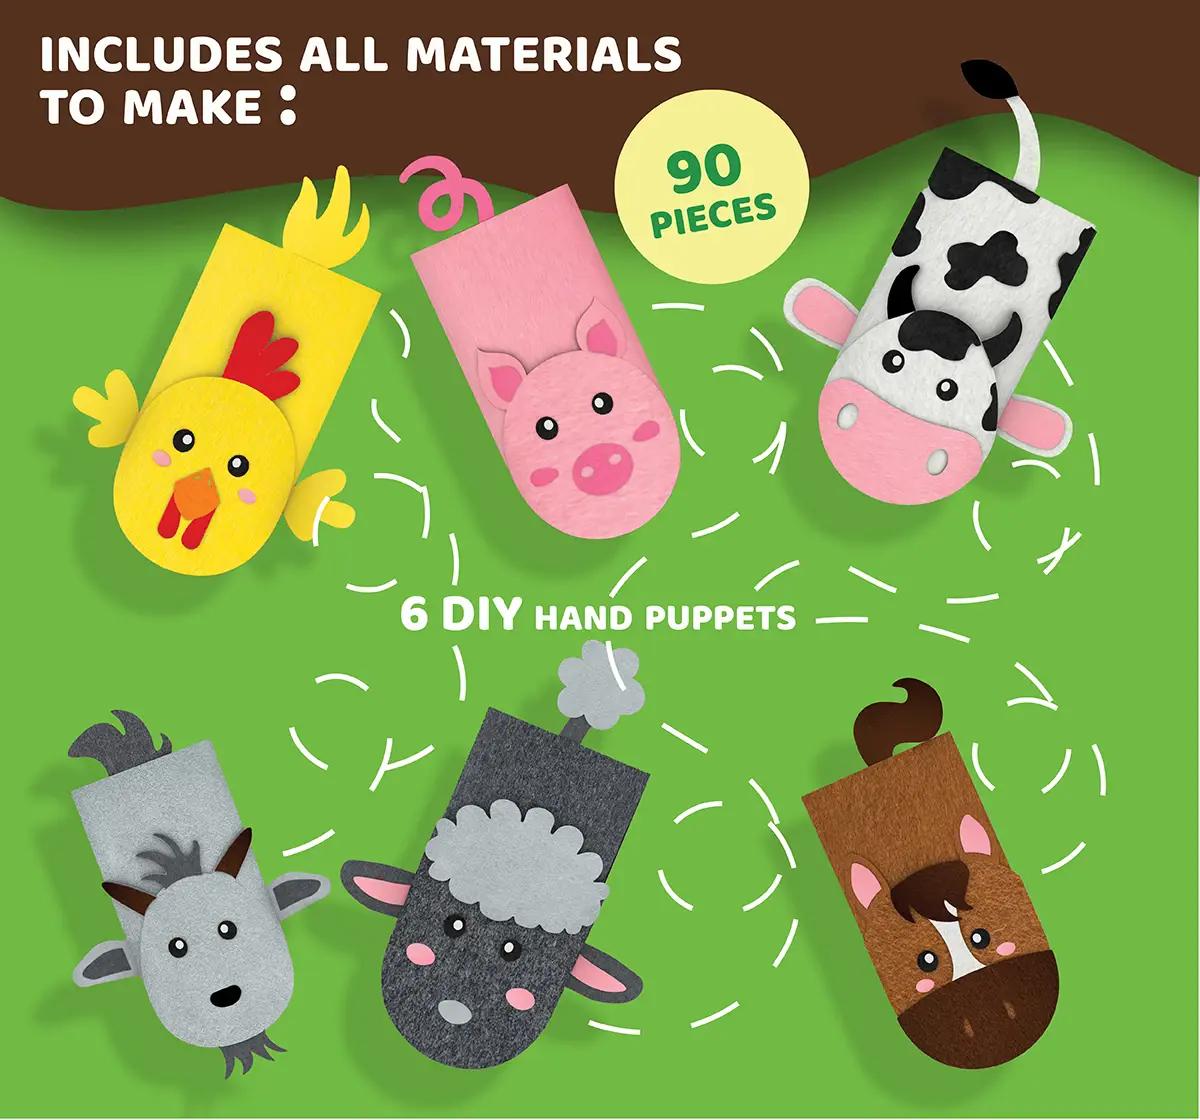 Jack In The Box Hand Puppet Farm Animal DIY Arts and Craft Kit for Kids 6-in-1 For Kids of Age 3Y+, Multicolour